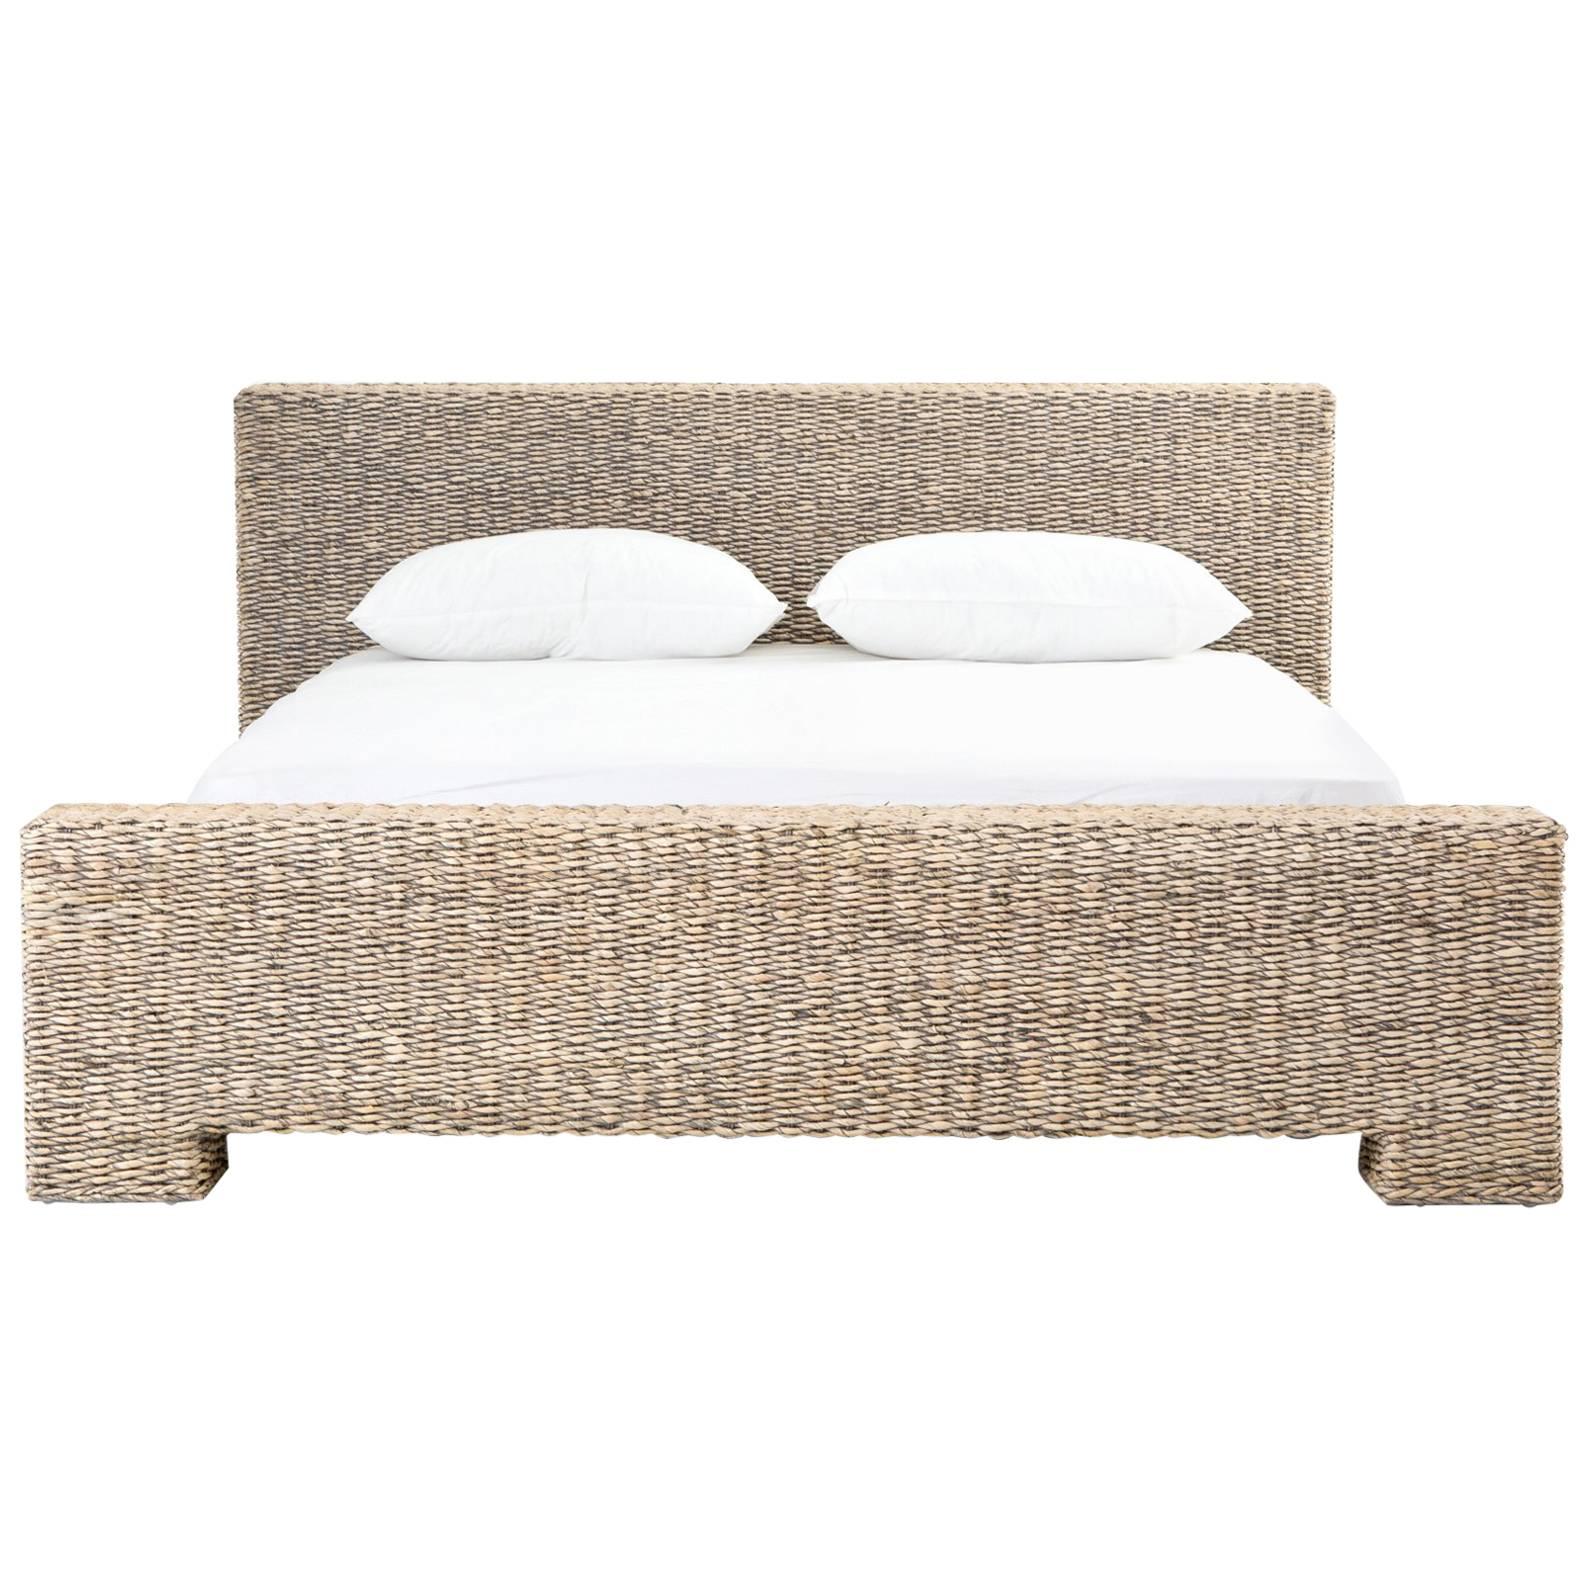 Low Profile Rattan Bed in King-Size For Sale